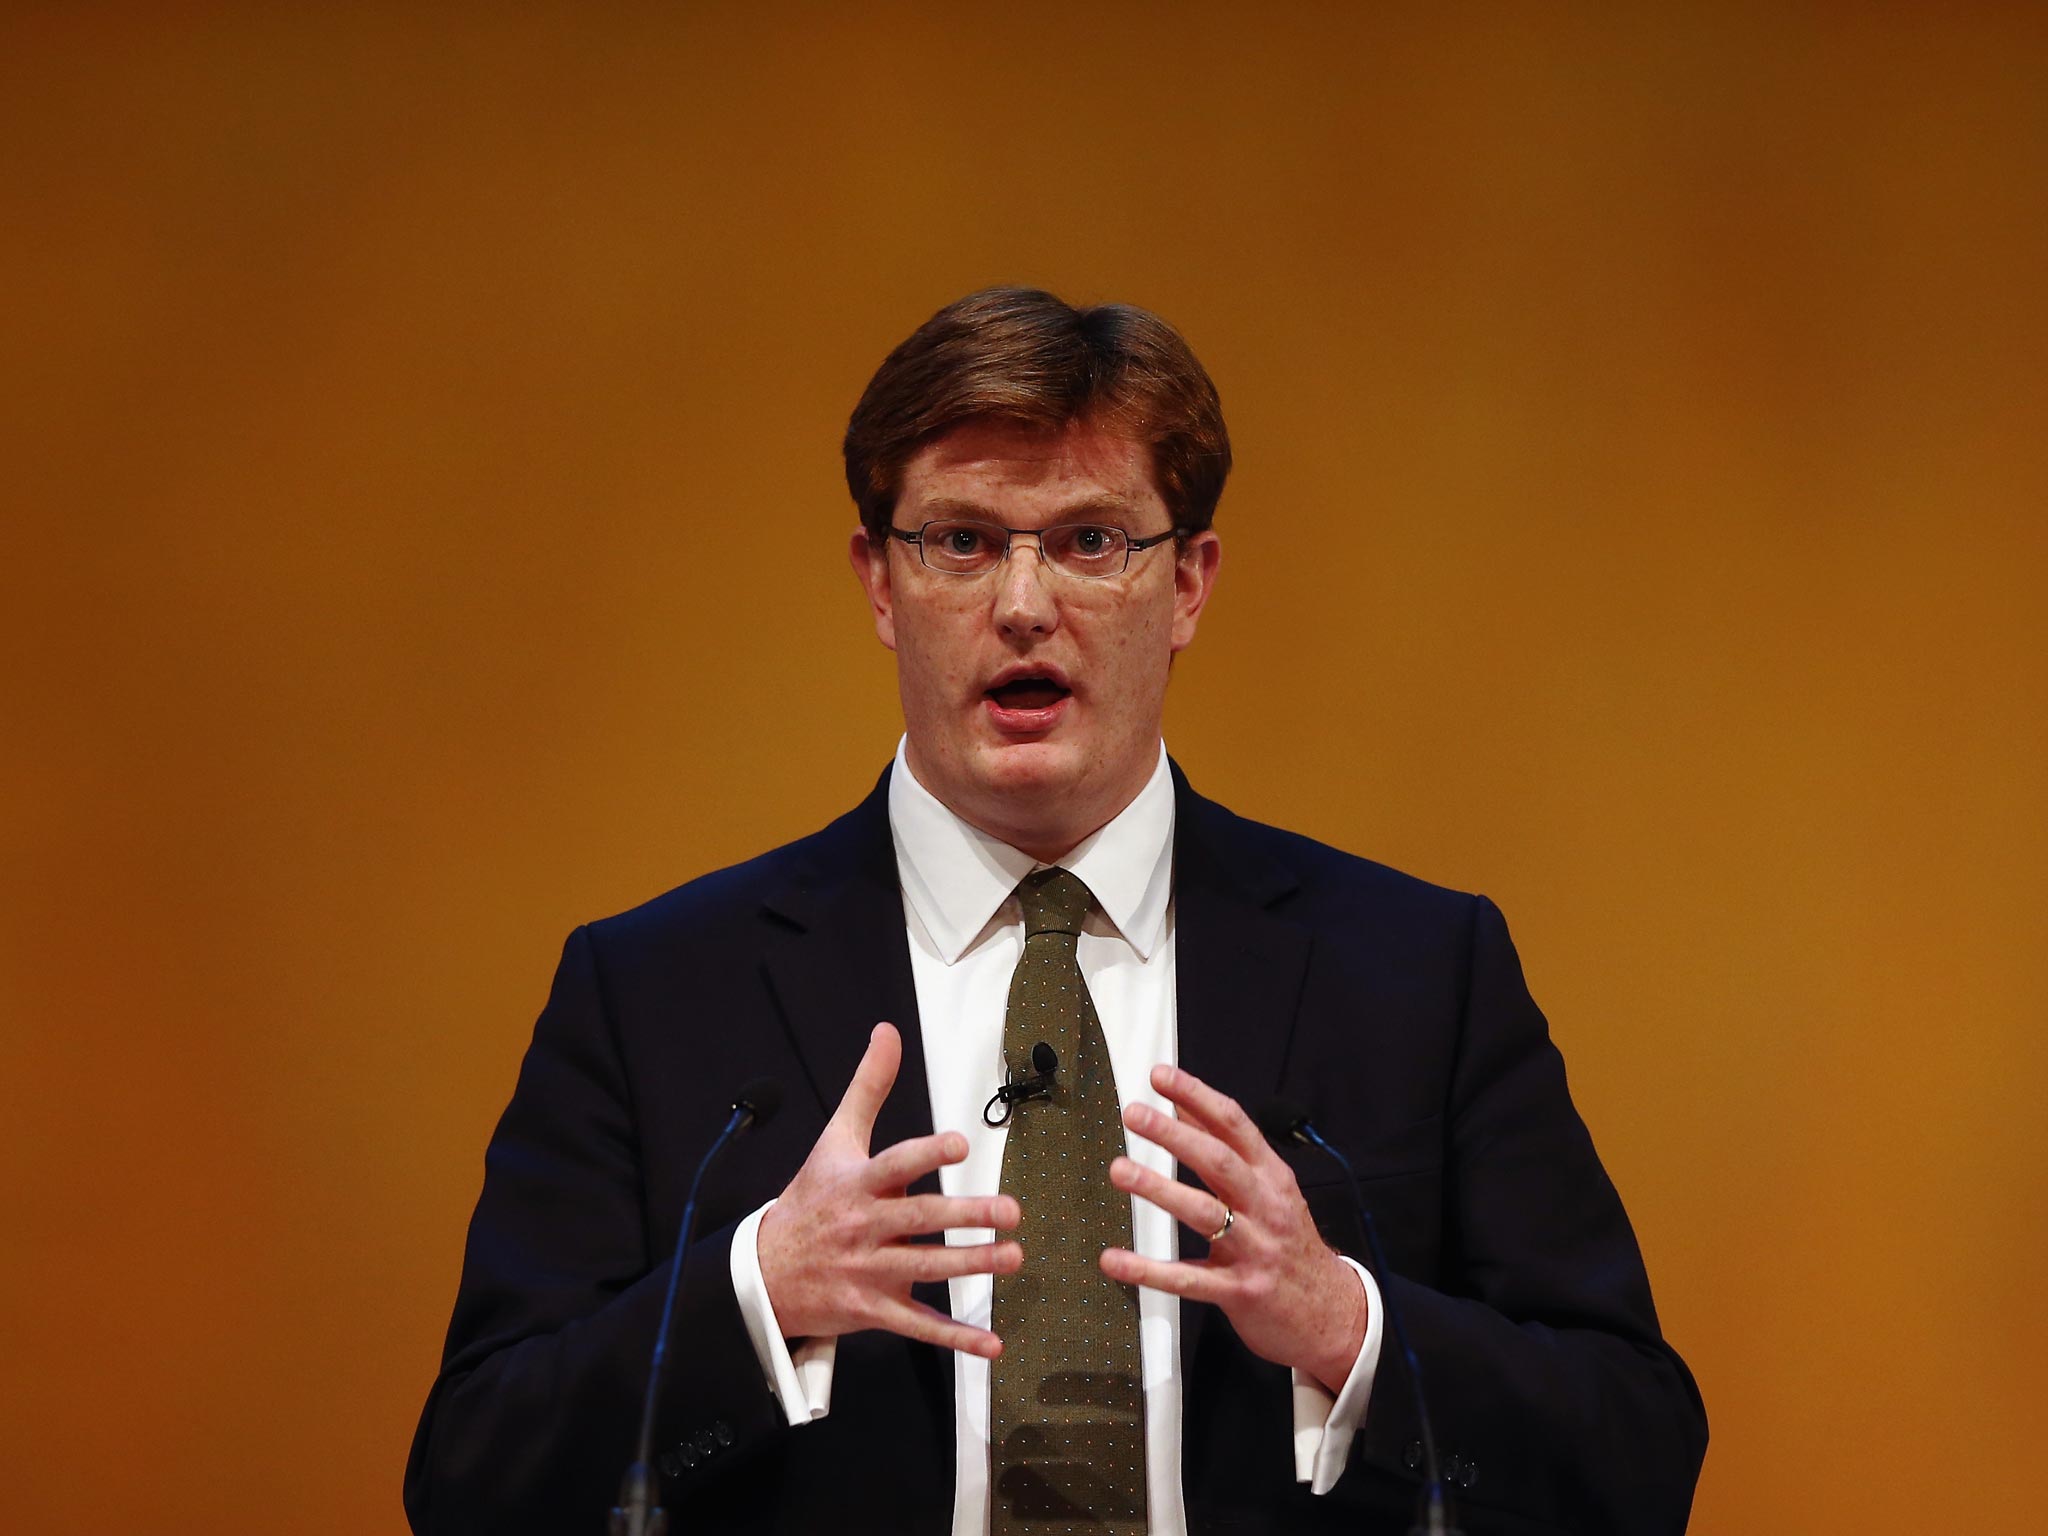 The Lib Dem Chief Treasury Secretary Danny Alexander will announce that the pledge will be included in the party’s election manifesto